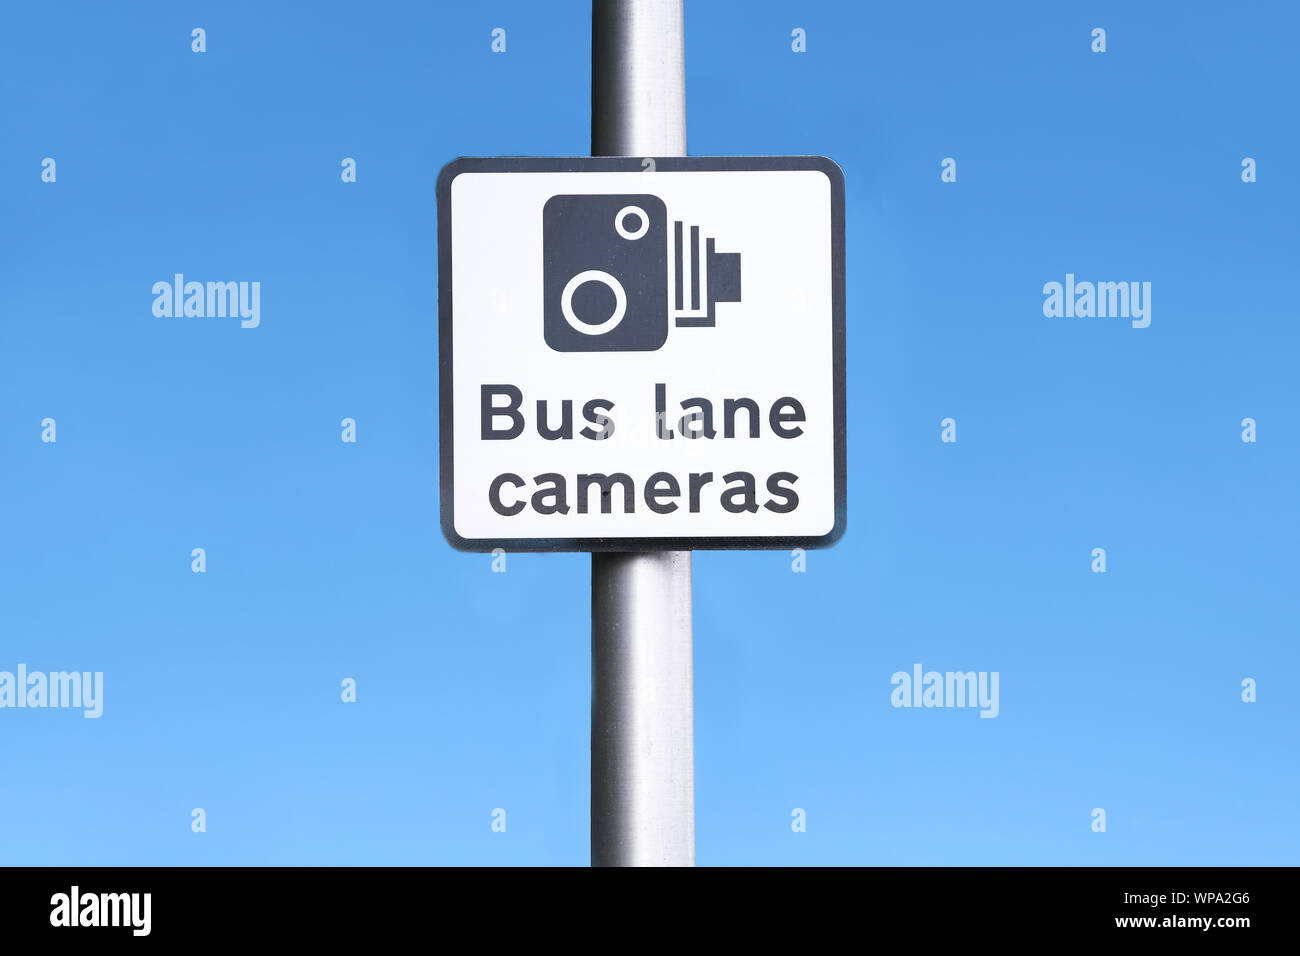 Bus lane camera symbol icon sign against blue sky at station in city Stock Photo